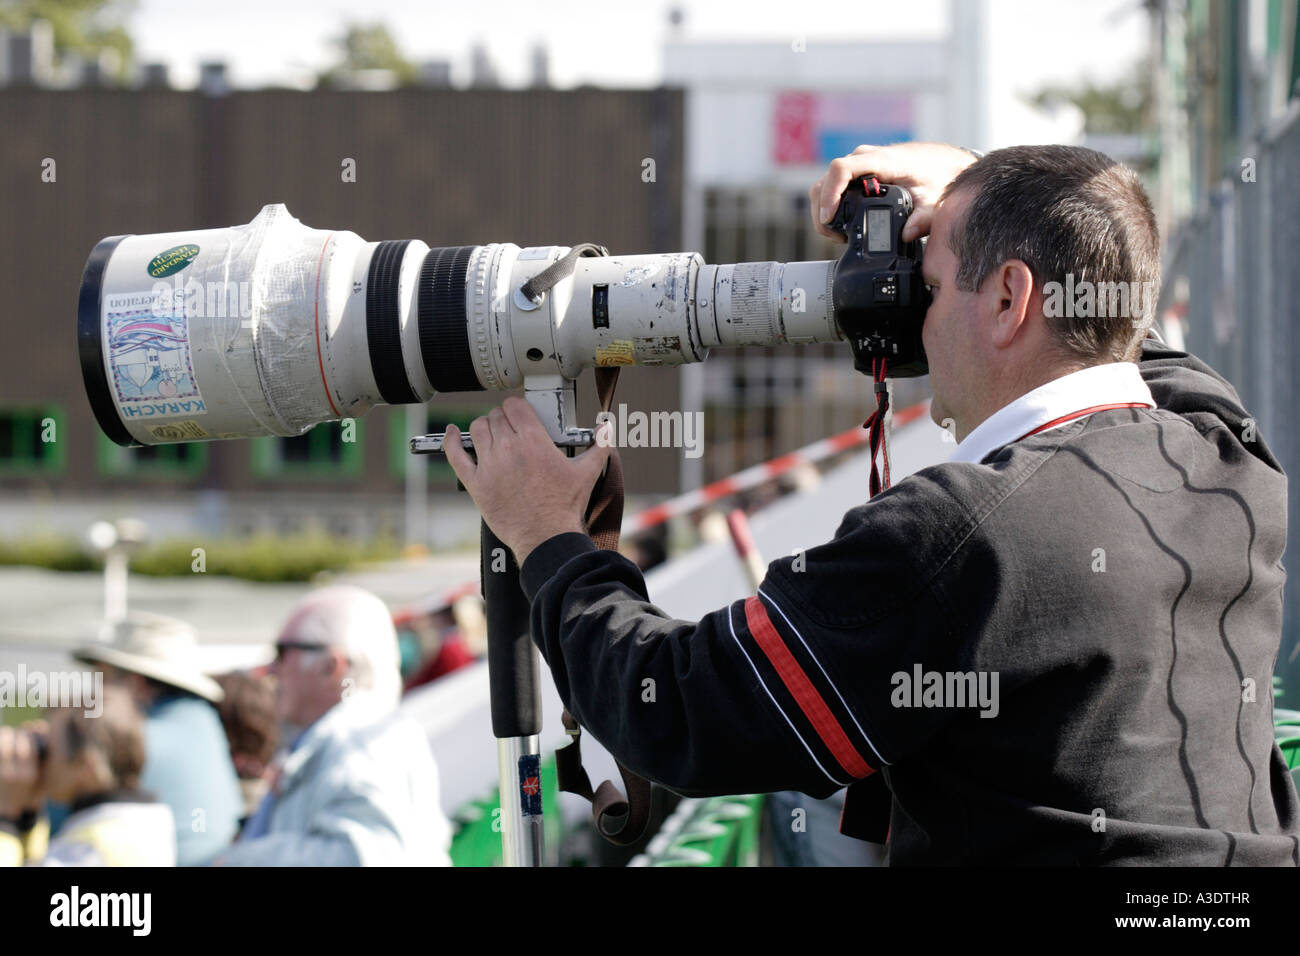 sports-photographer-with-a-long-canon-telephoto-lens-photographing-A3DTHR.jpg